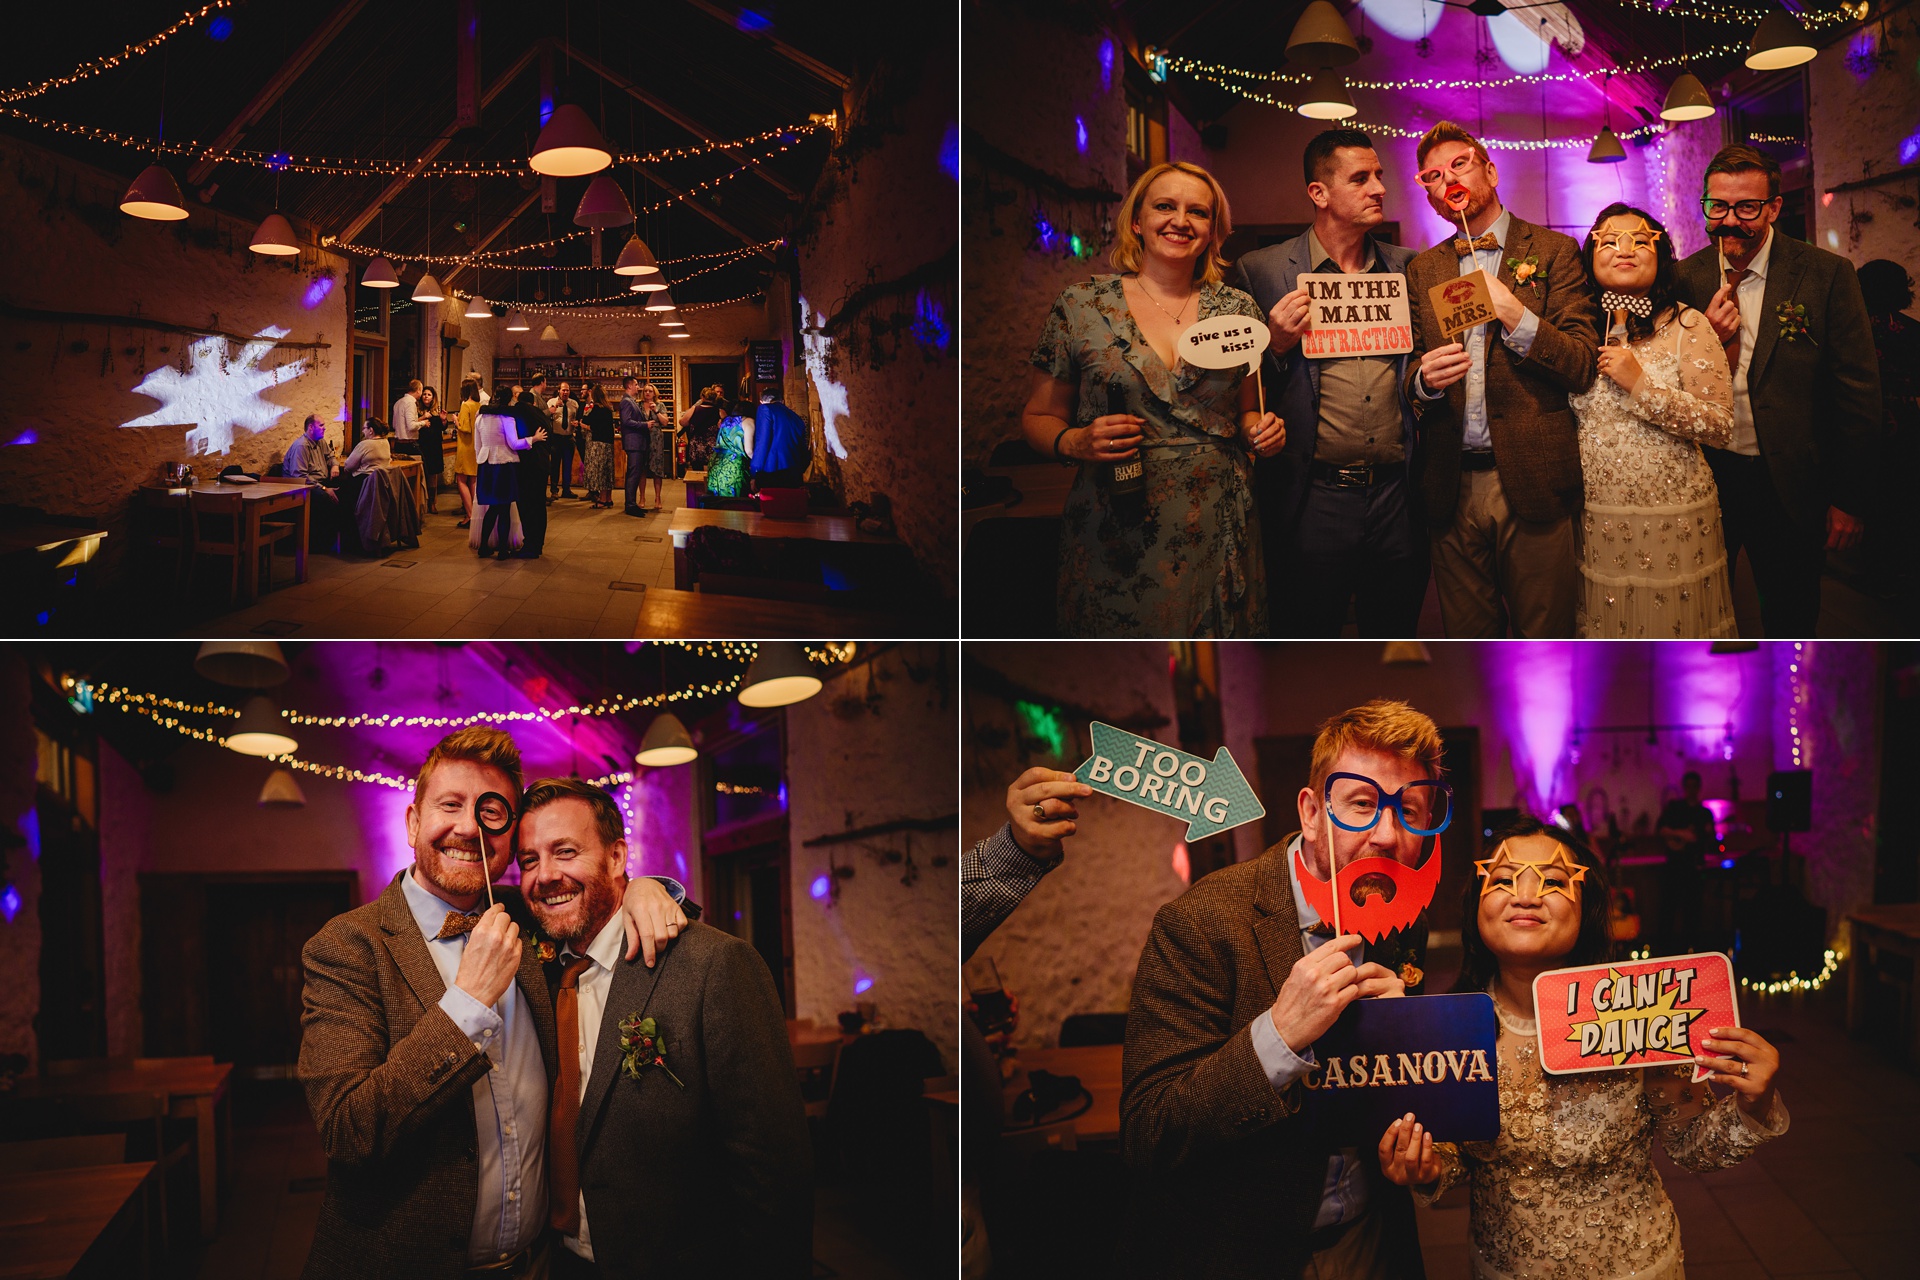 wedding guests wearing silly masks and signs